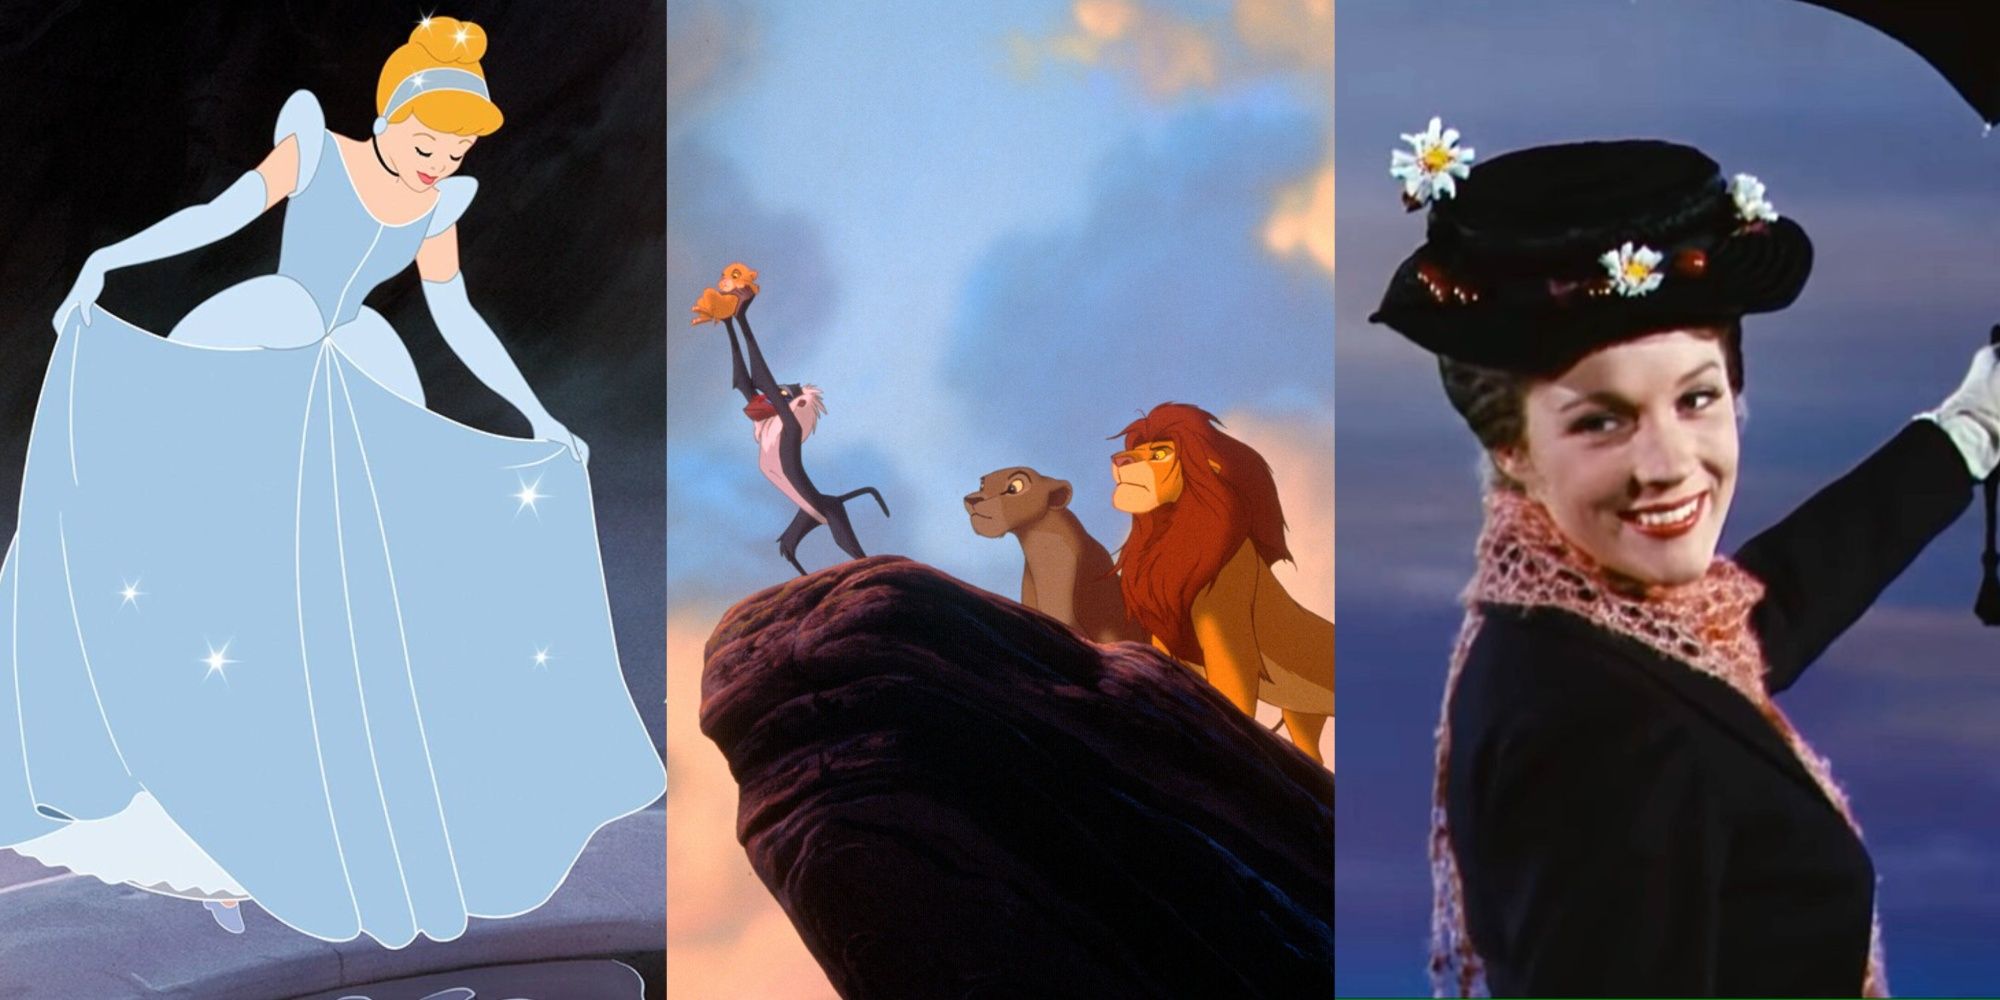 How Many Disney Movies Featured Split Image Cinderella, Lion King, and Mary Poppins